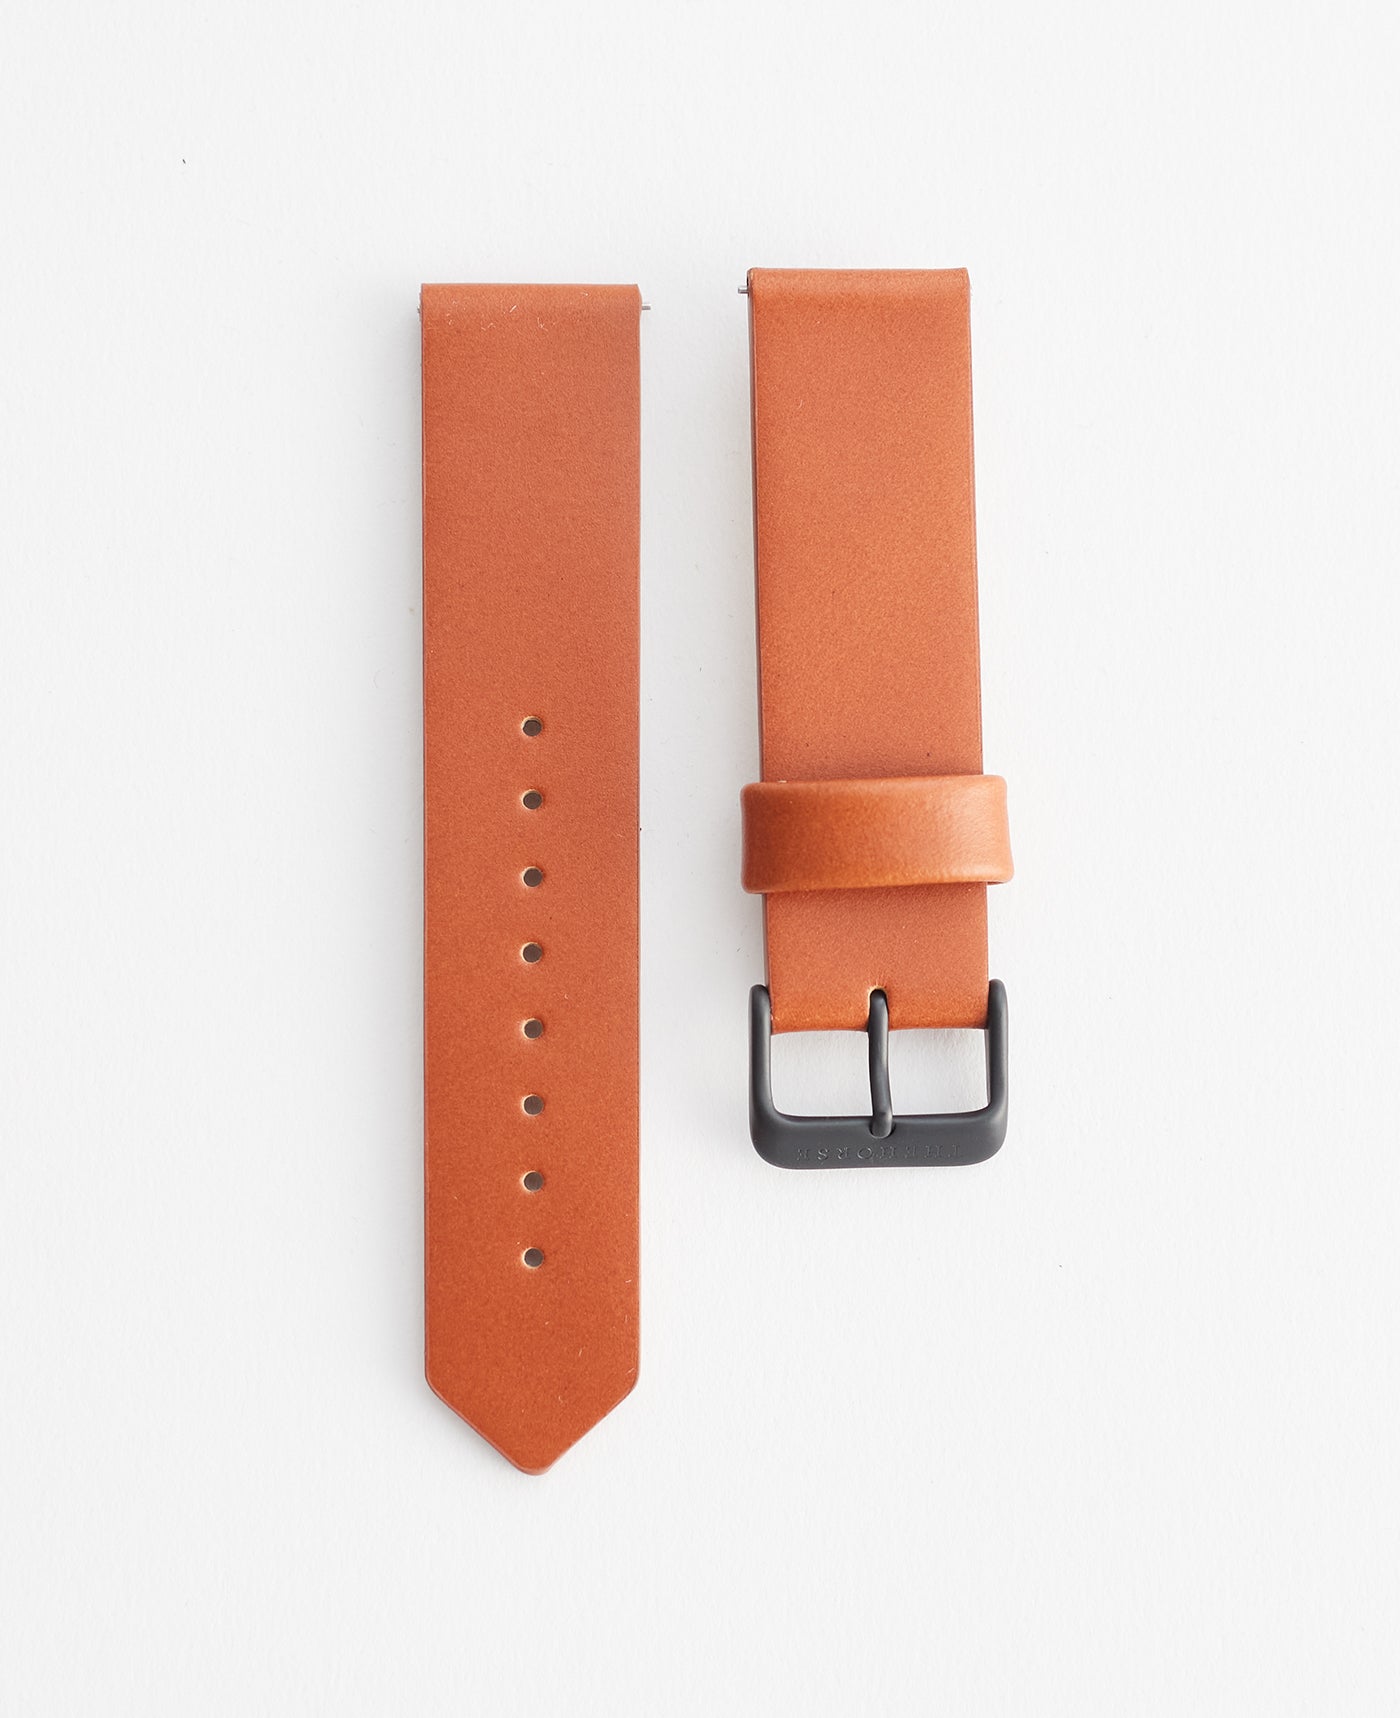 The 20mm Original Watch in Tan Leather / Matte Black Buckle Strap by The Horse®